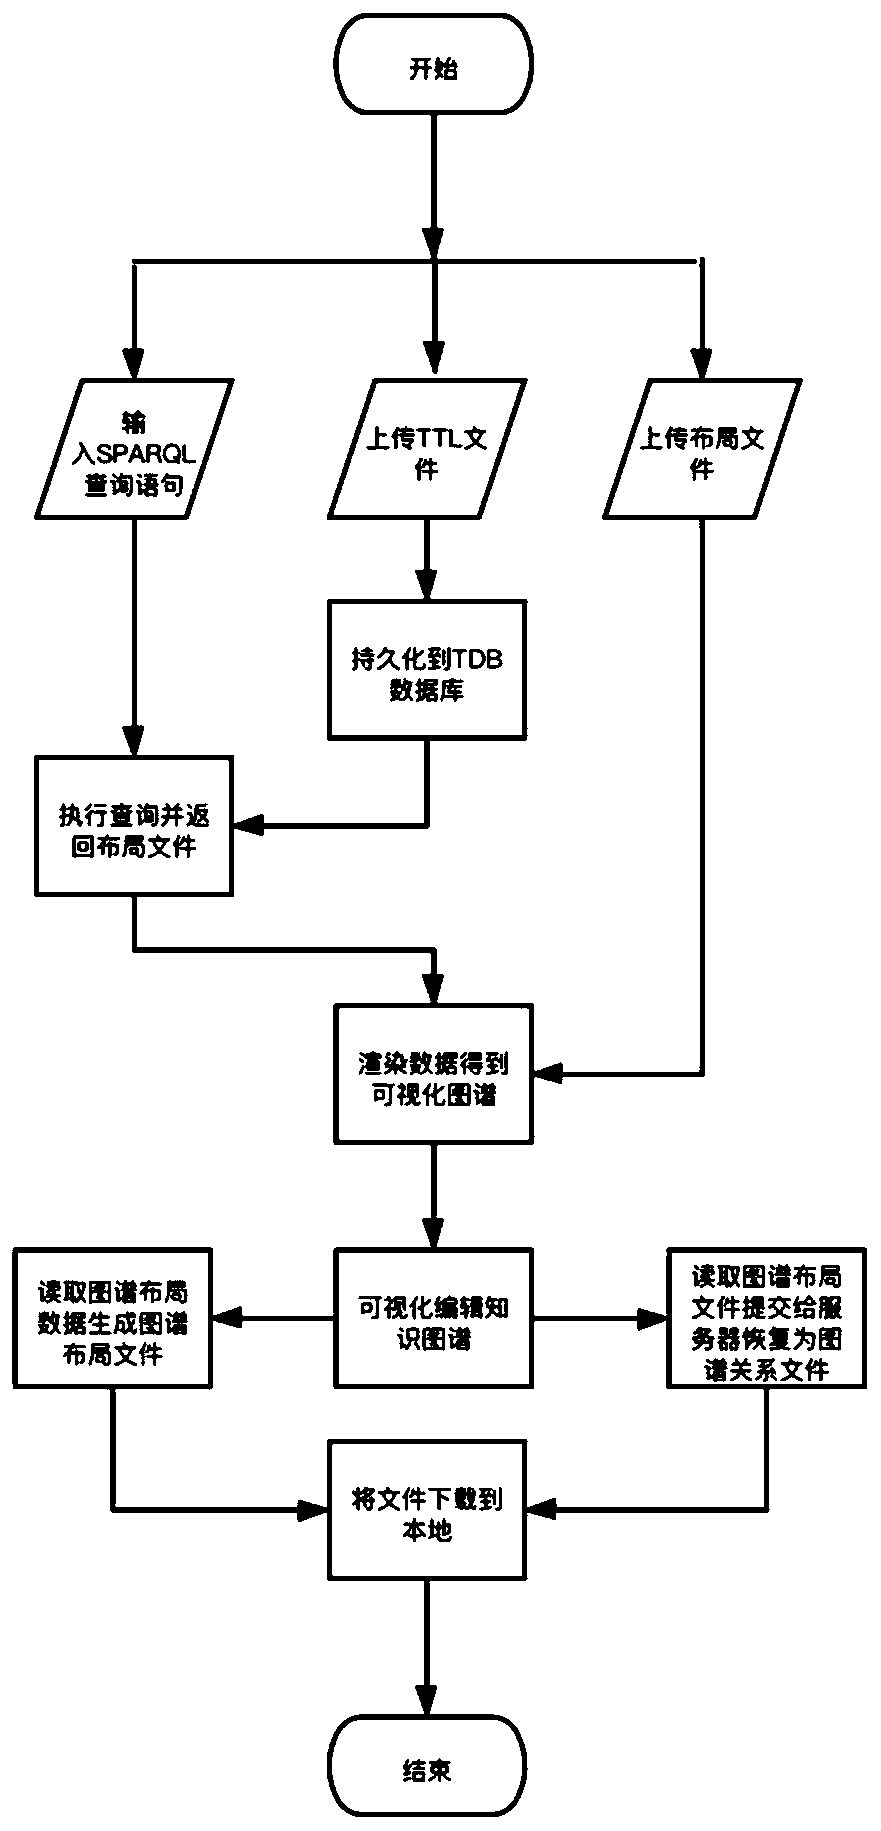 Knowledge graph visual editing and persistence implementation method and system architecture